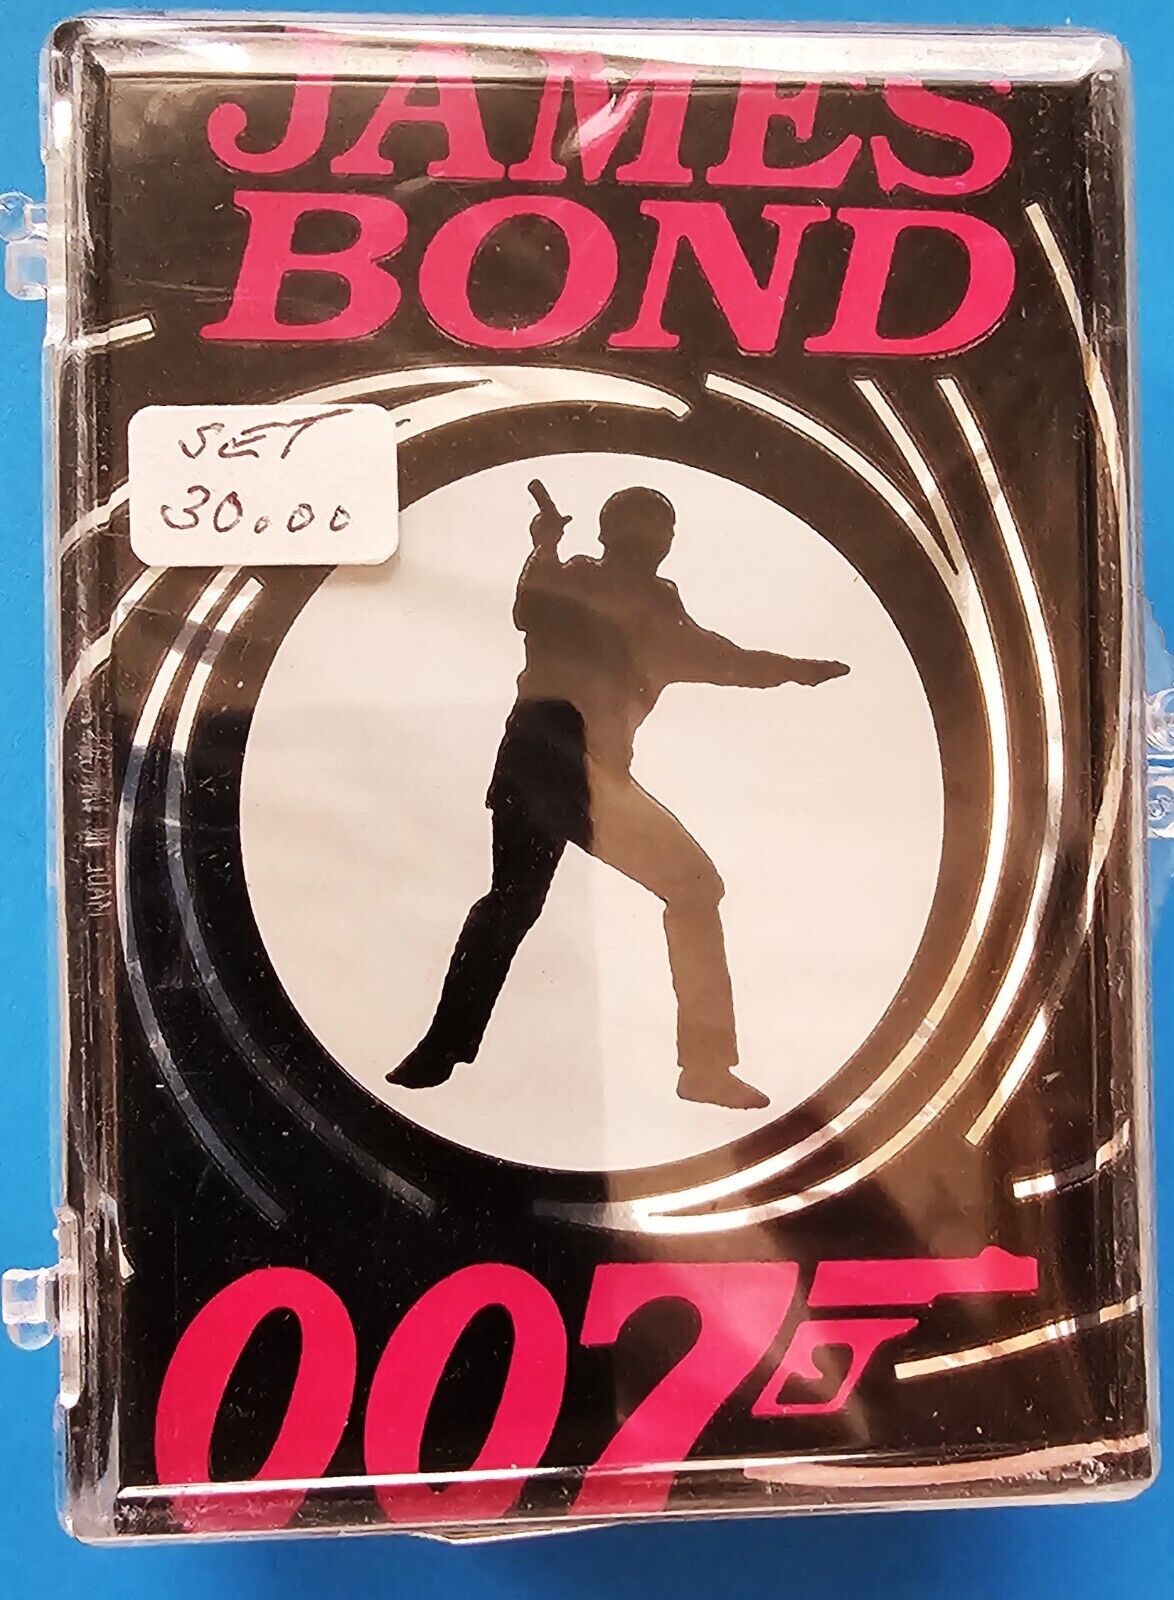 1993 James Bond Series 1 Complete Trading Card Set 1-110 from Eclipse